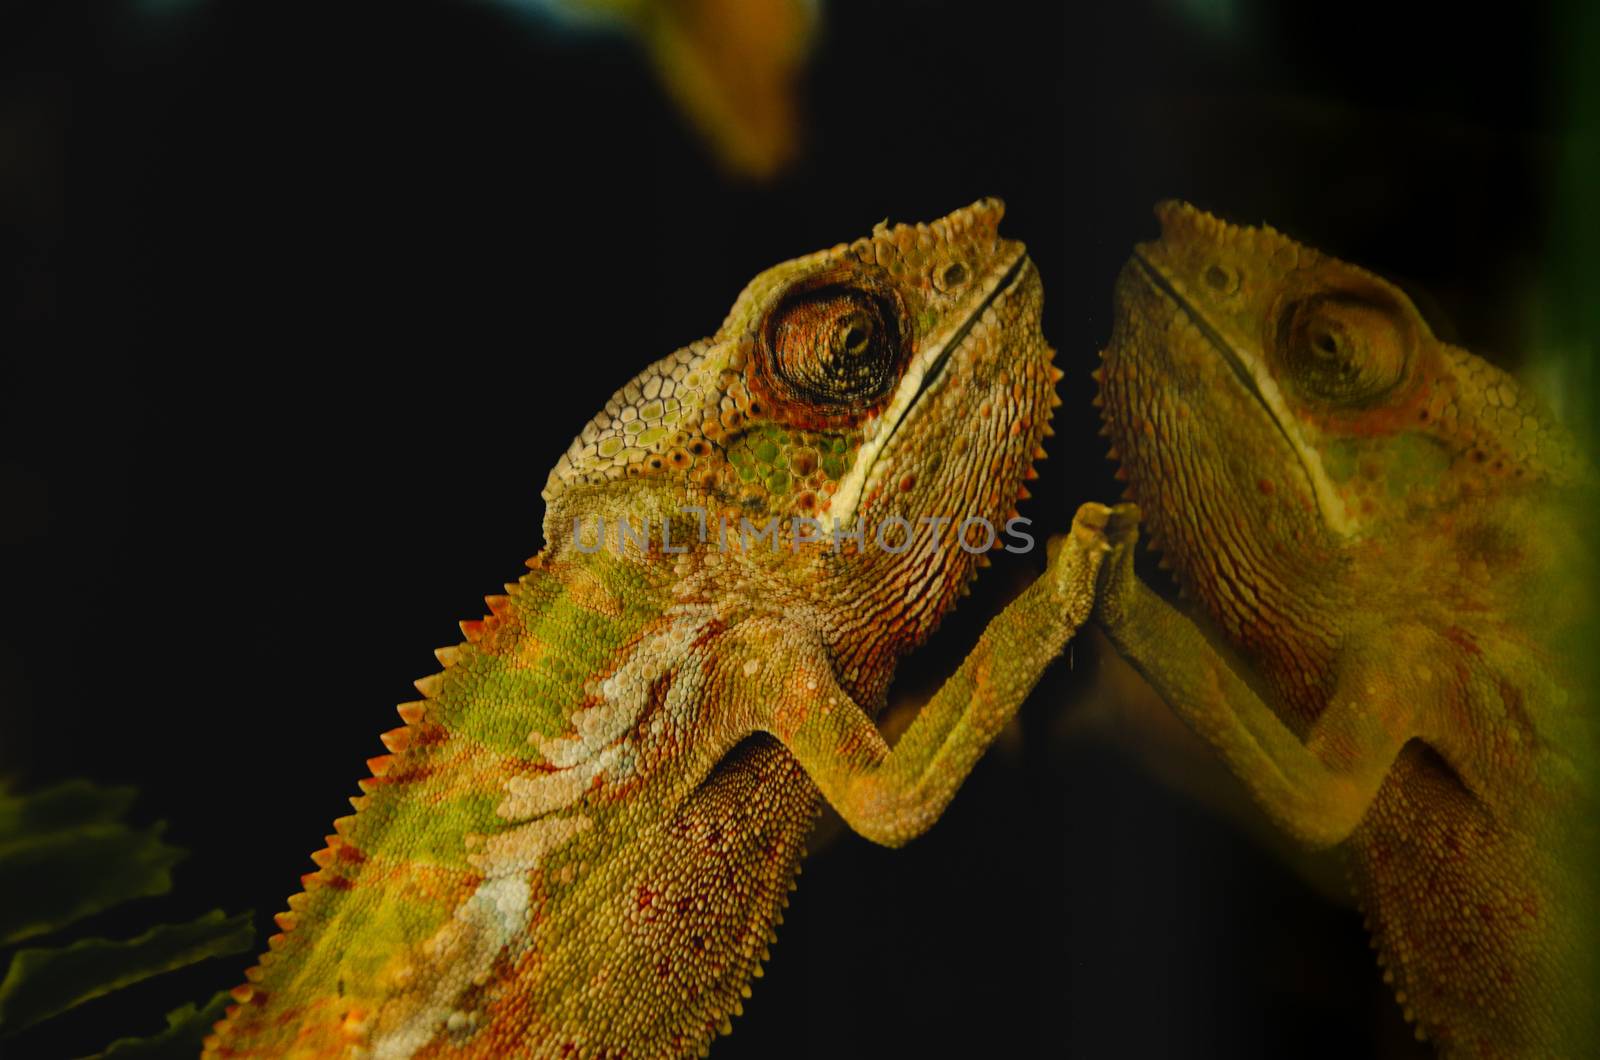 Blur on purpose for background use, a Panther chameleon (Furcifer pardalis) reflected on a glass surface to show concept of duality, abstraction and illusion